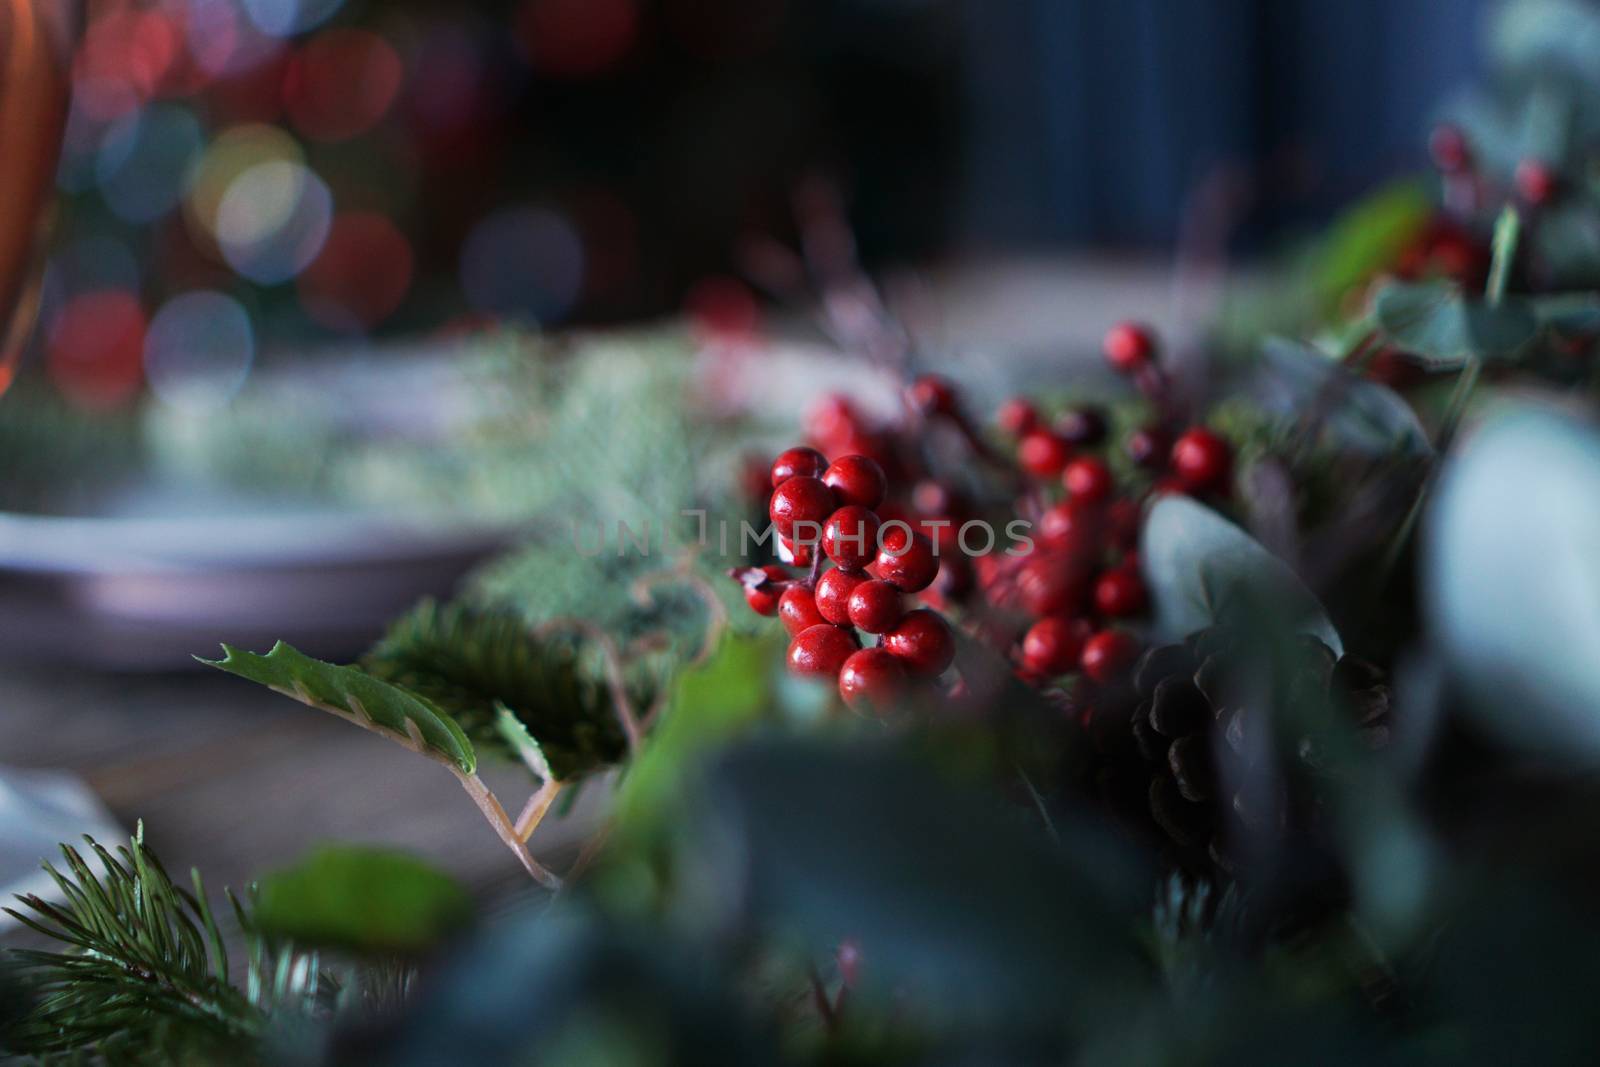 Rowan berries decor for Christmas party - blue, green and red colors